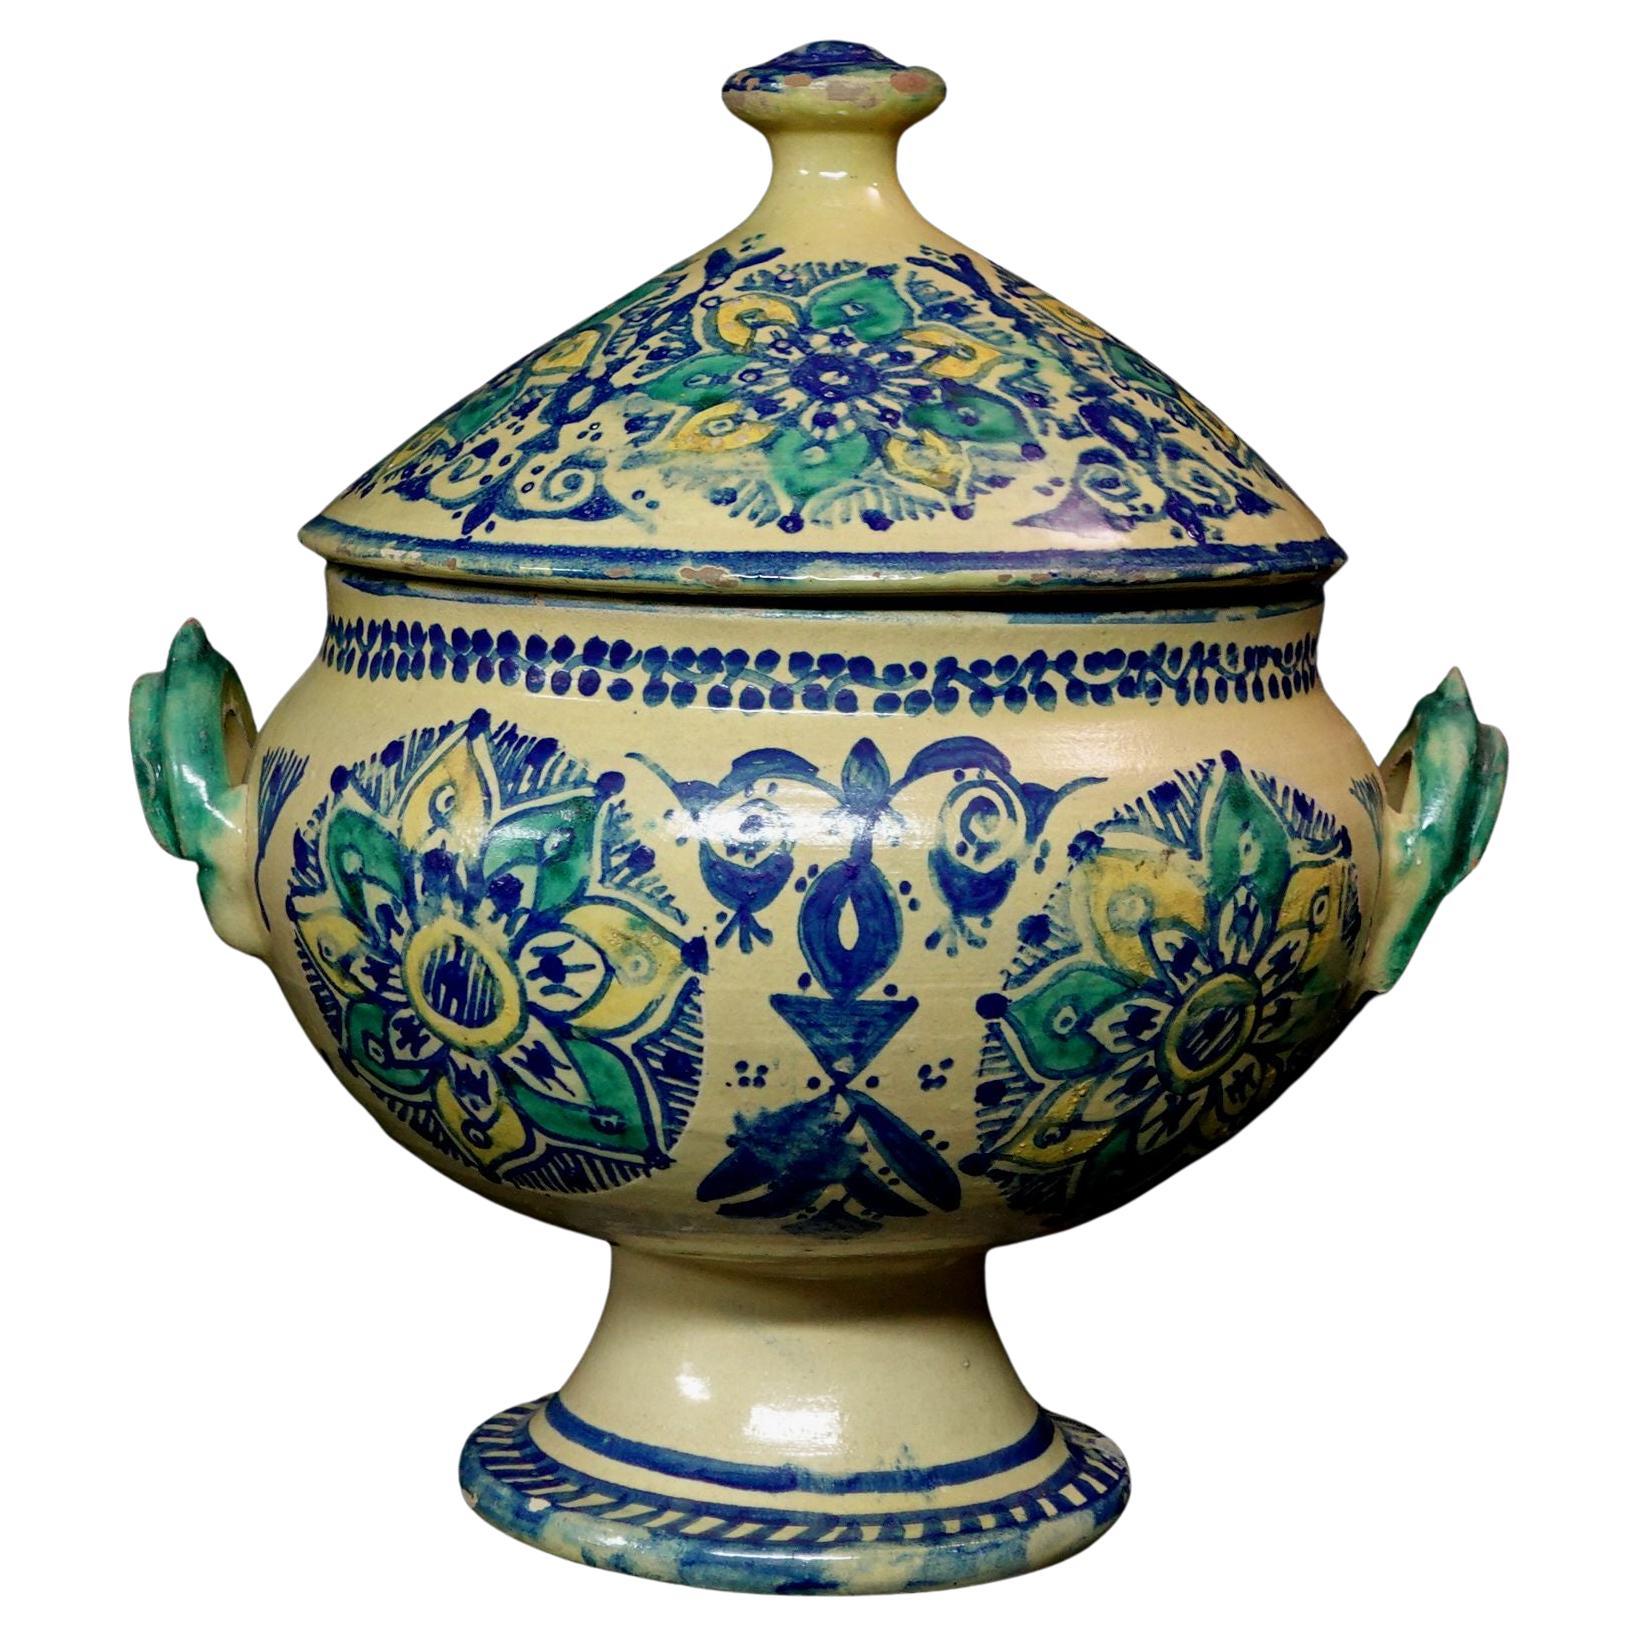 Morocco Covered Bowl, Jar, Early 20th Century